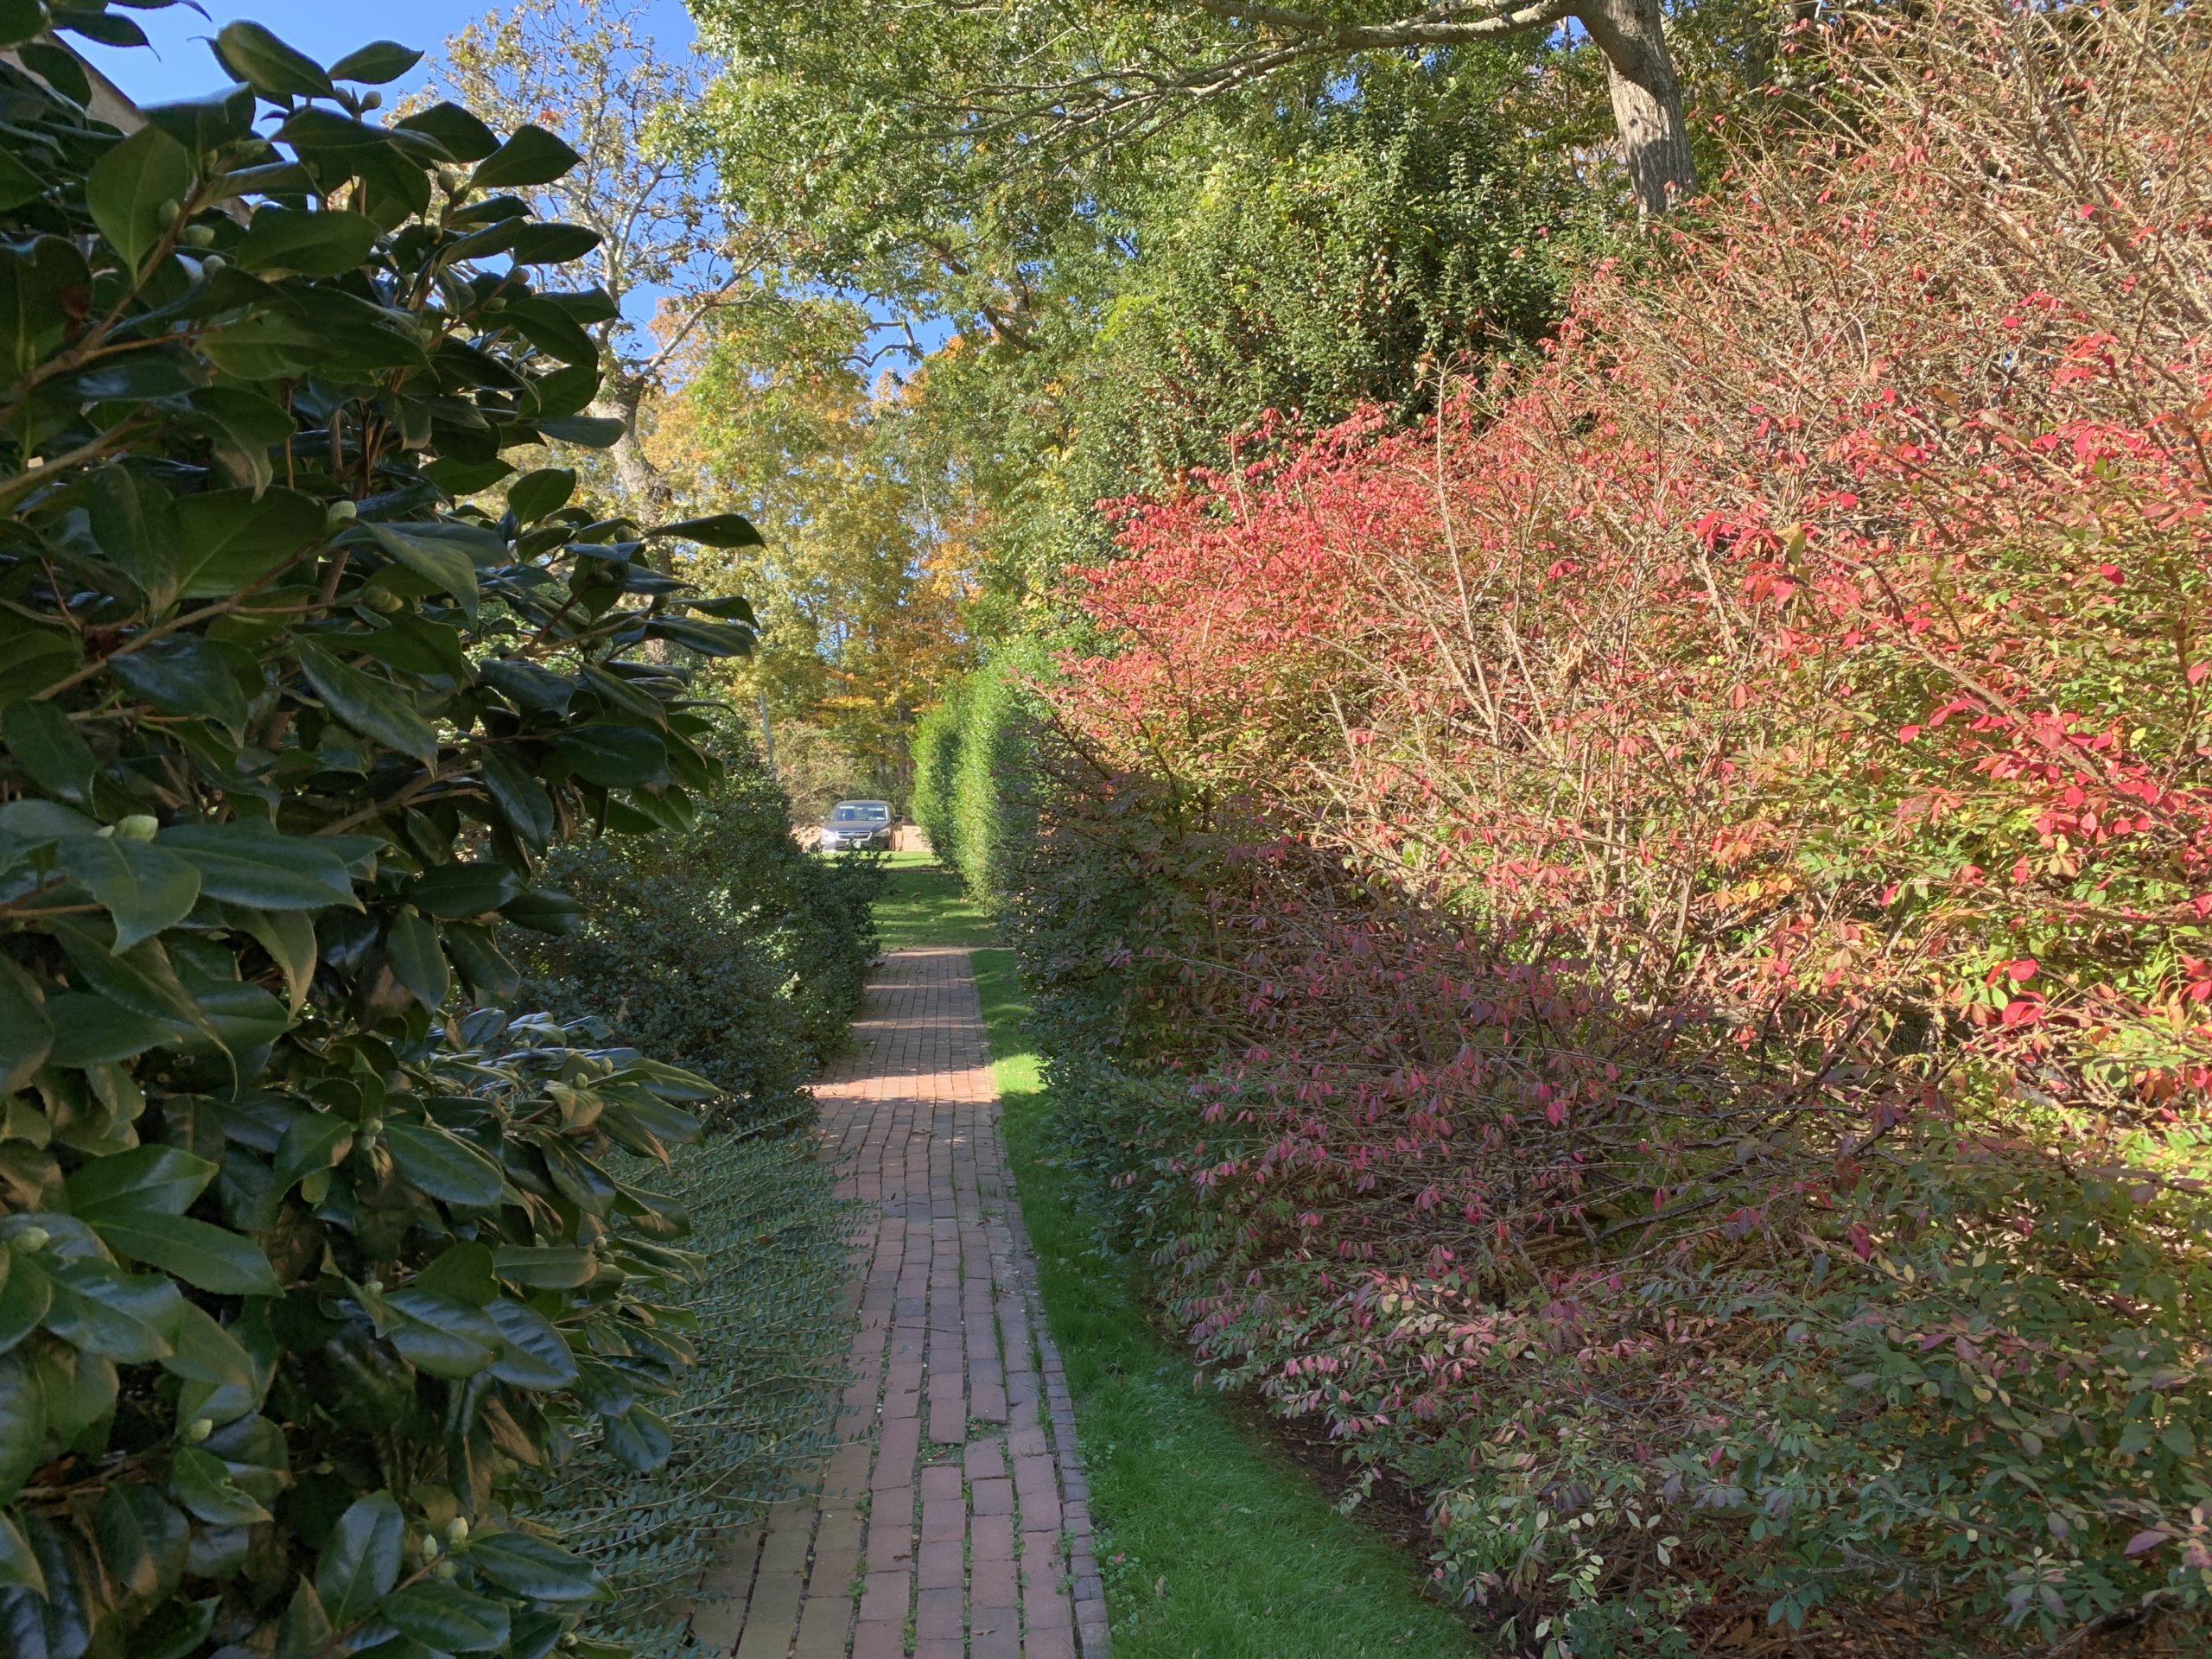 Take the opportunity to explore the Bridge Gardens this week in the Hamptons